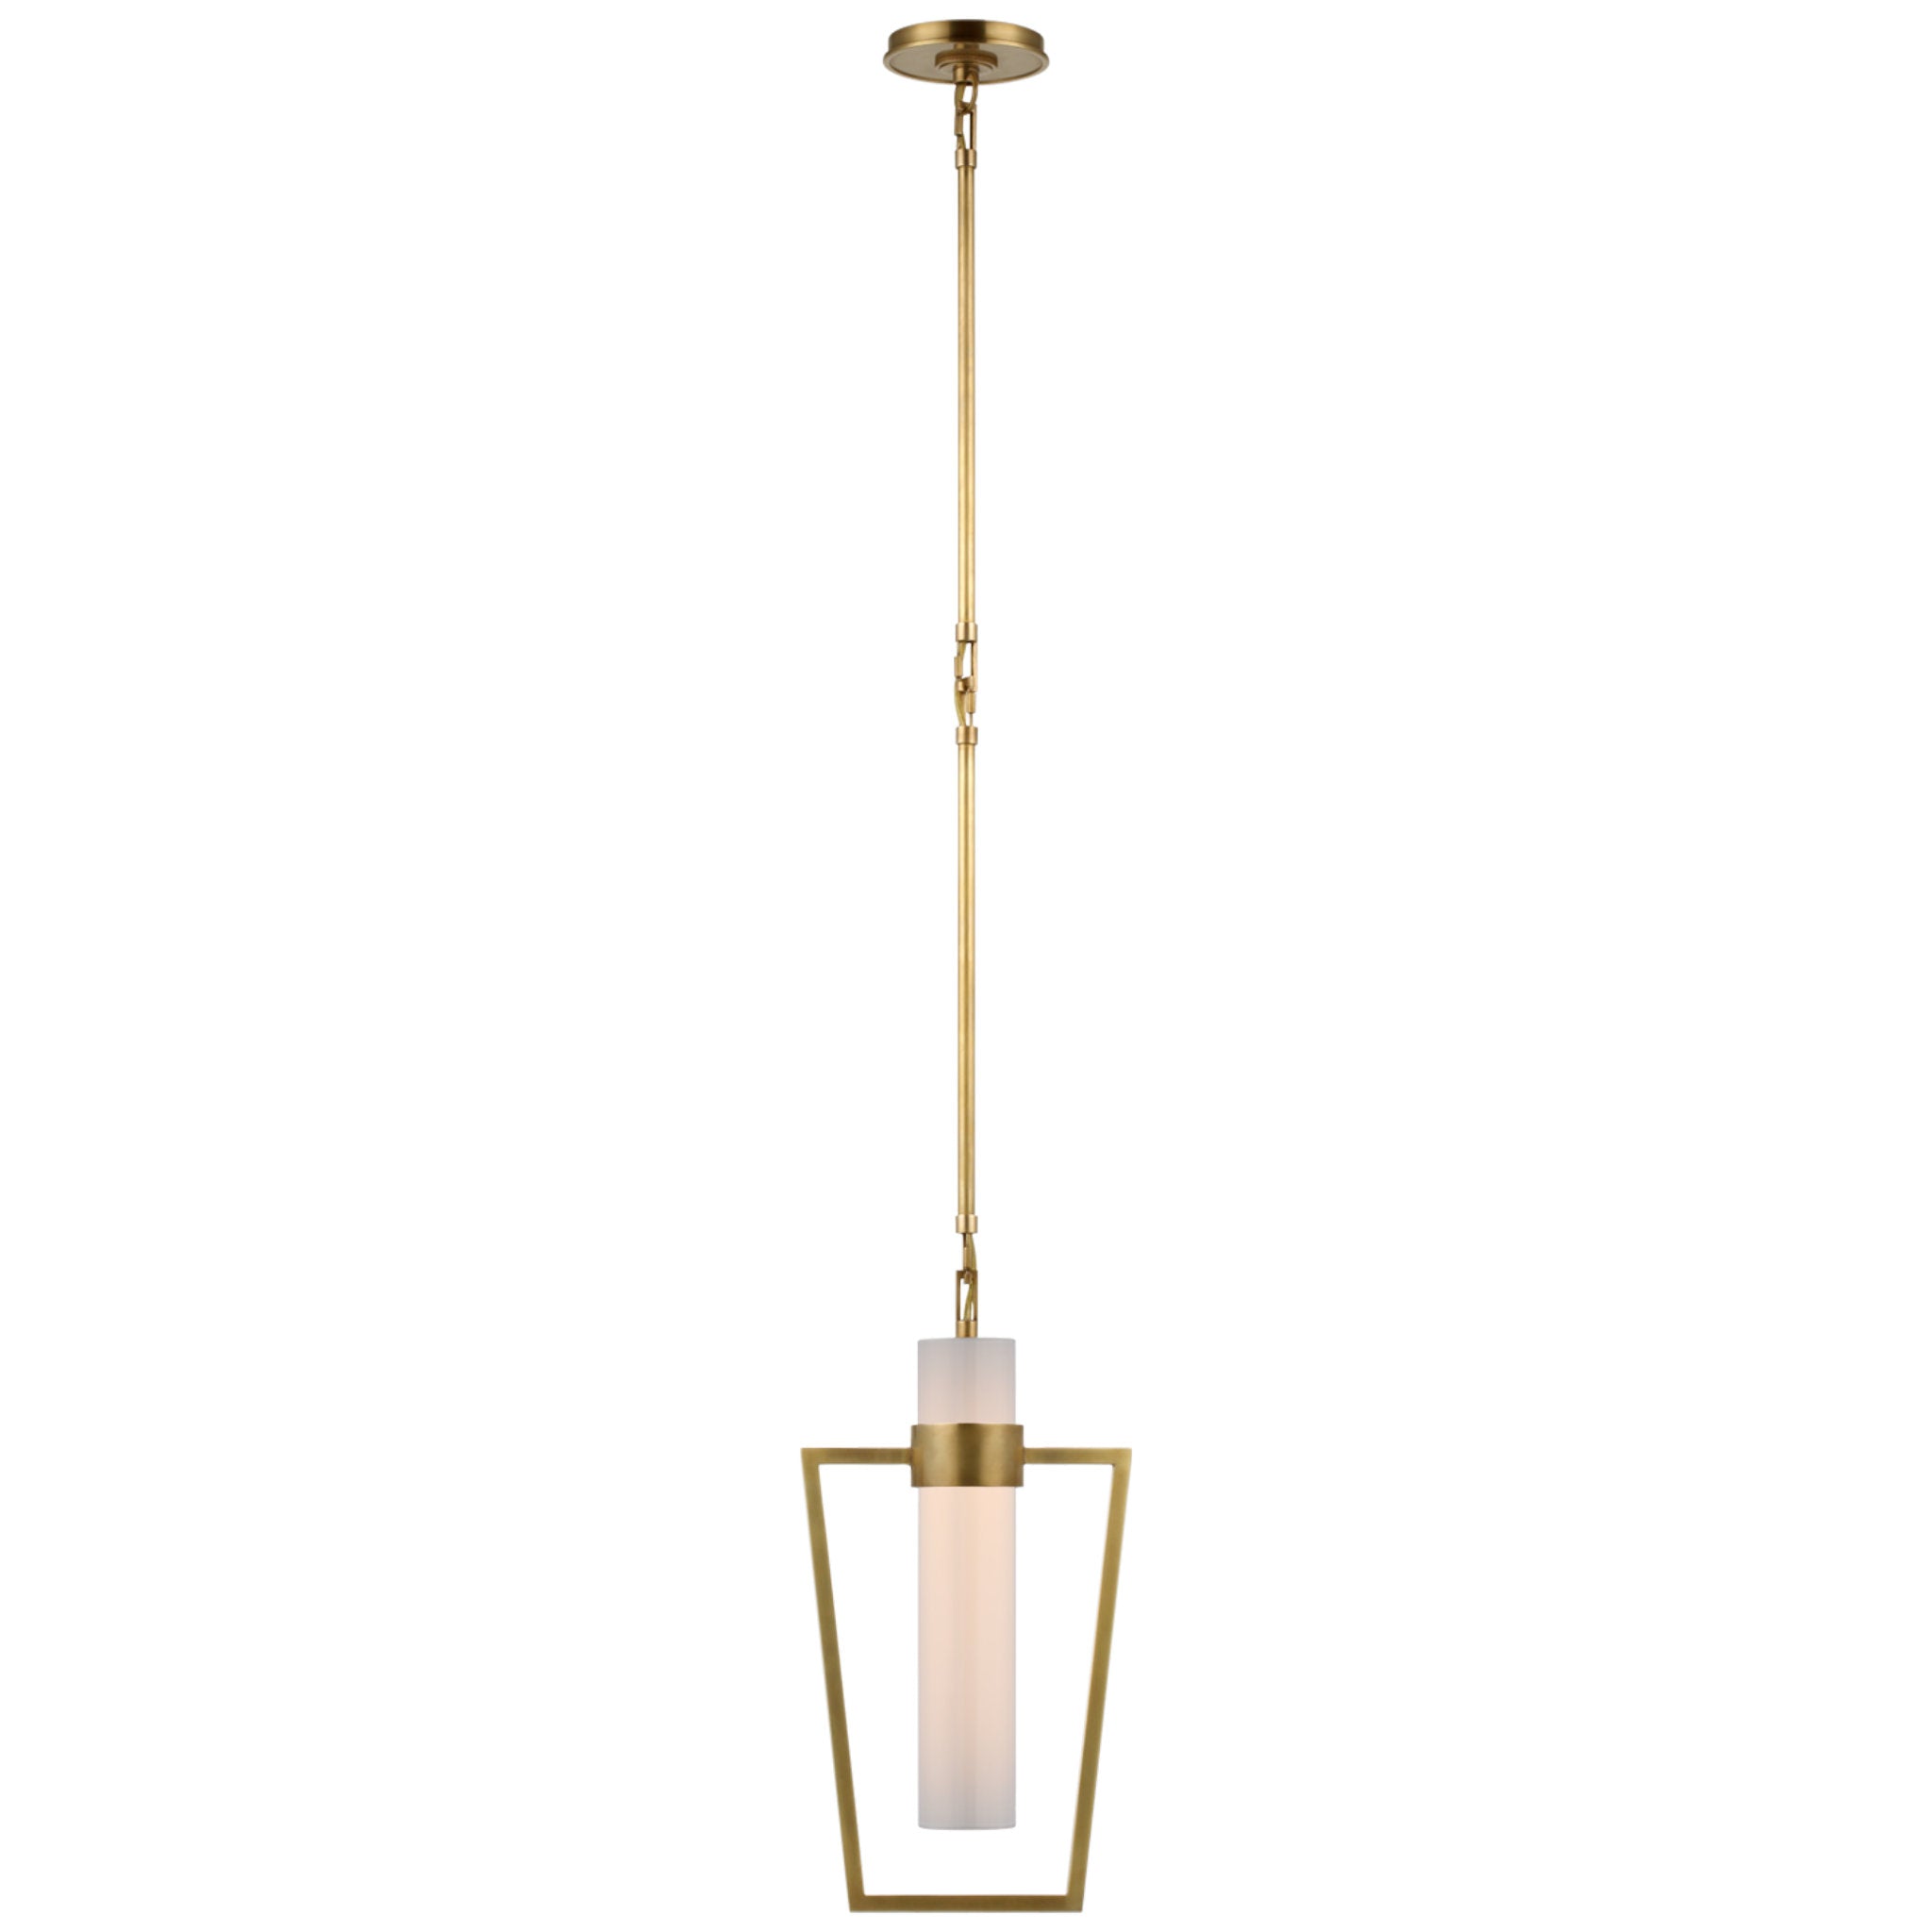 Ian K. Fowler Presidio Petite Caged Pendant in Hand-Rubbed Antique Brass with White Glass